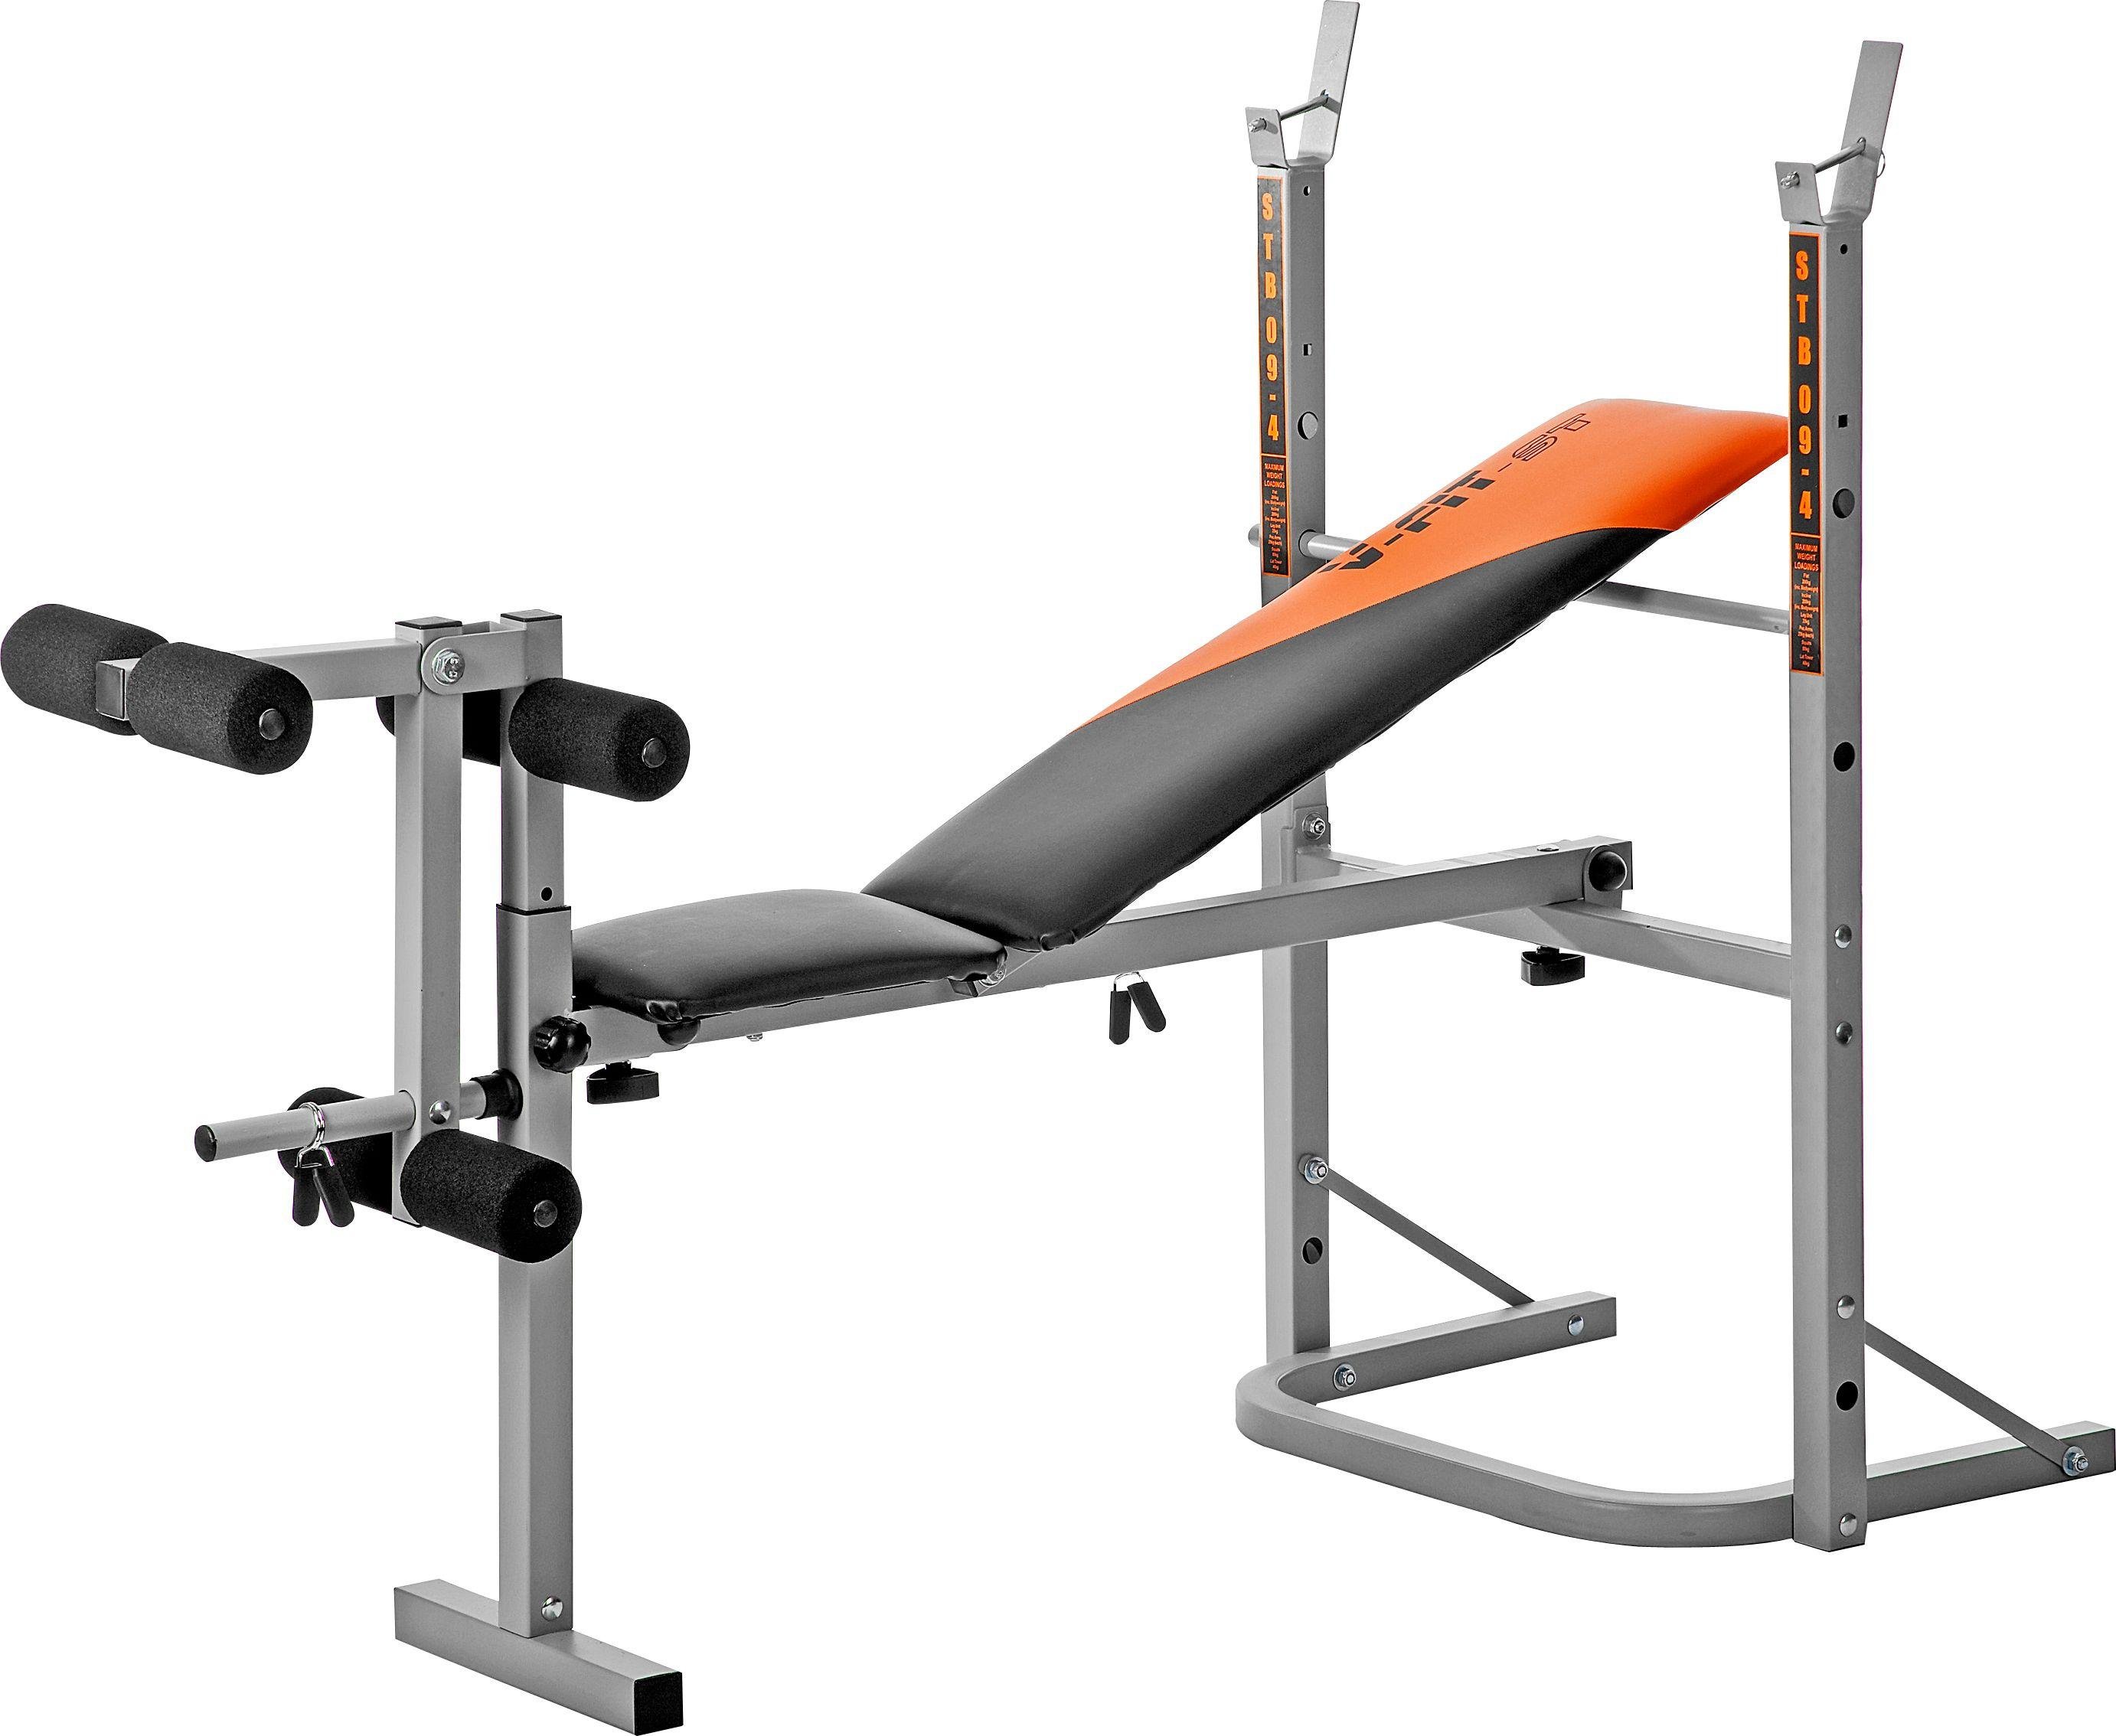 V-fit Herculean STB 09-1 Folding Workout Bench.